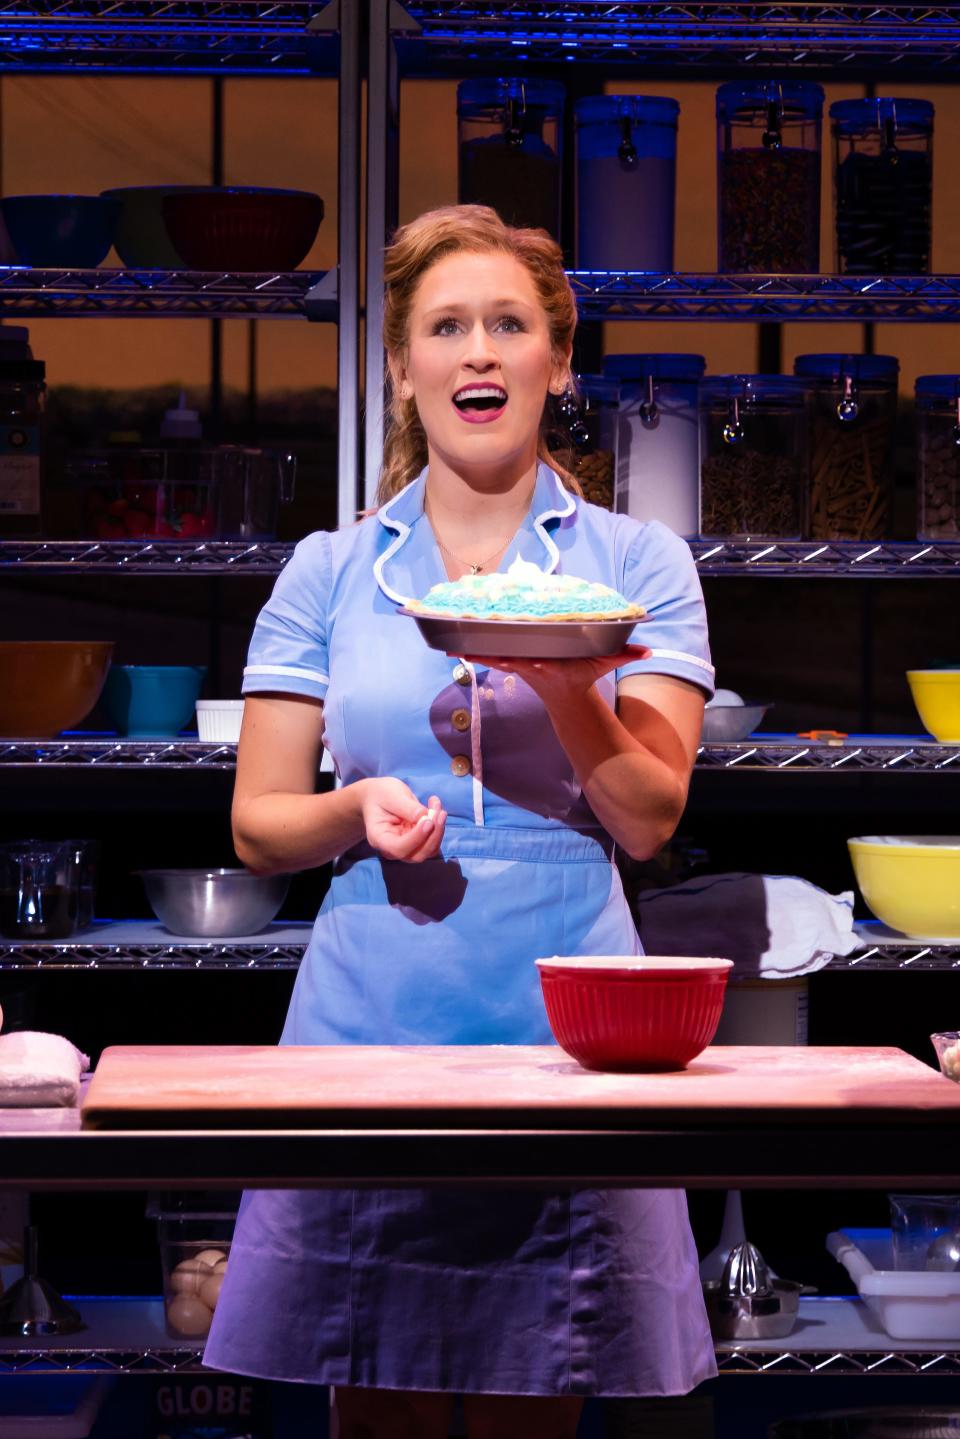 The musical "Waitress," starring Stephanie Torns as Jenna, will play at Playhouses Square's Hanna Theatre Thursday through June 26.